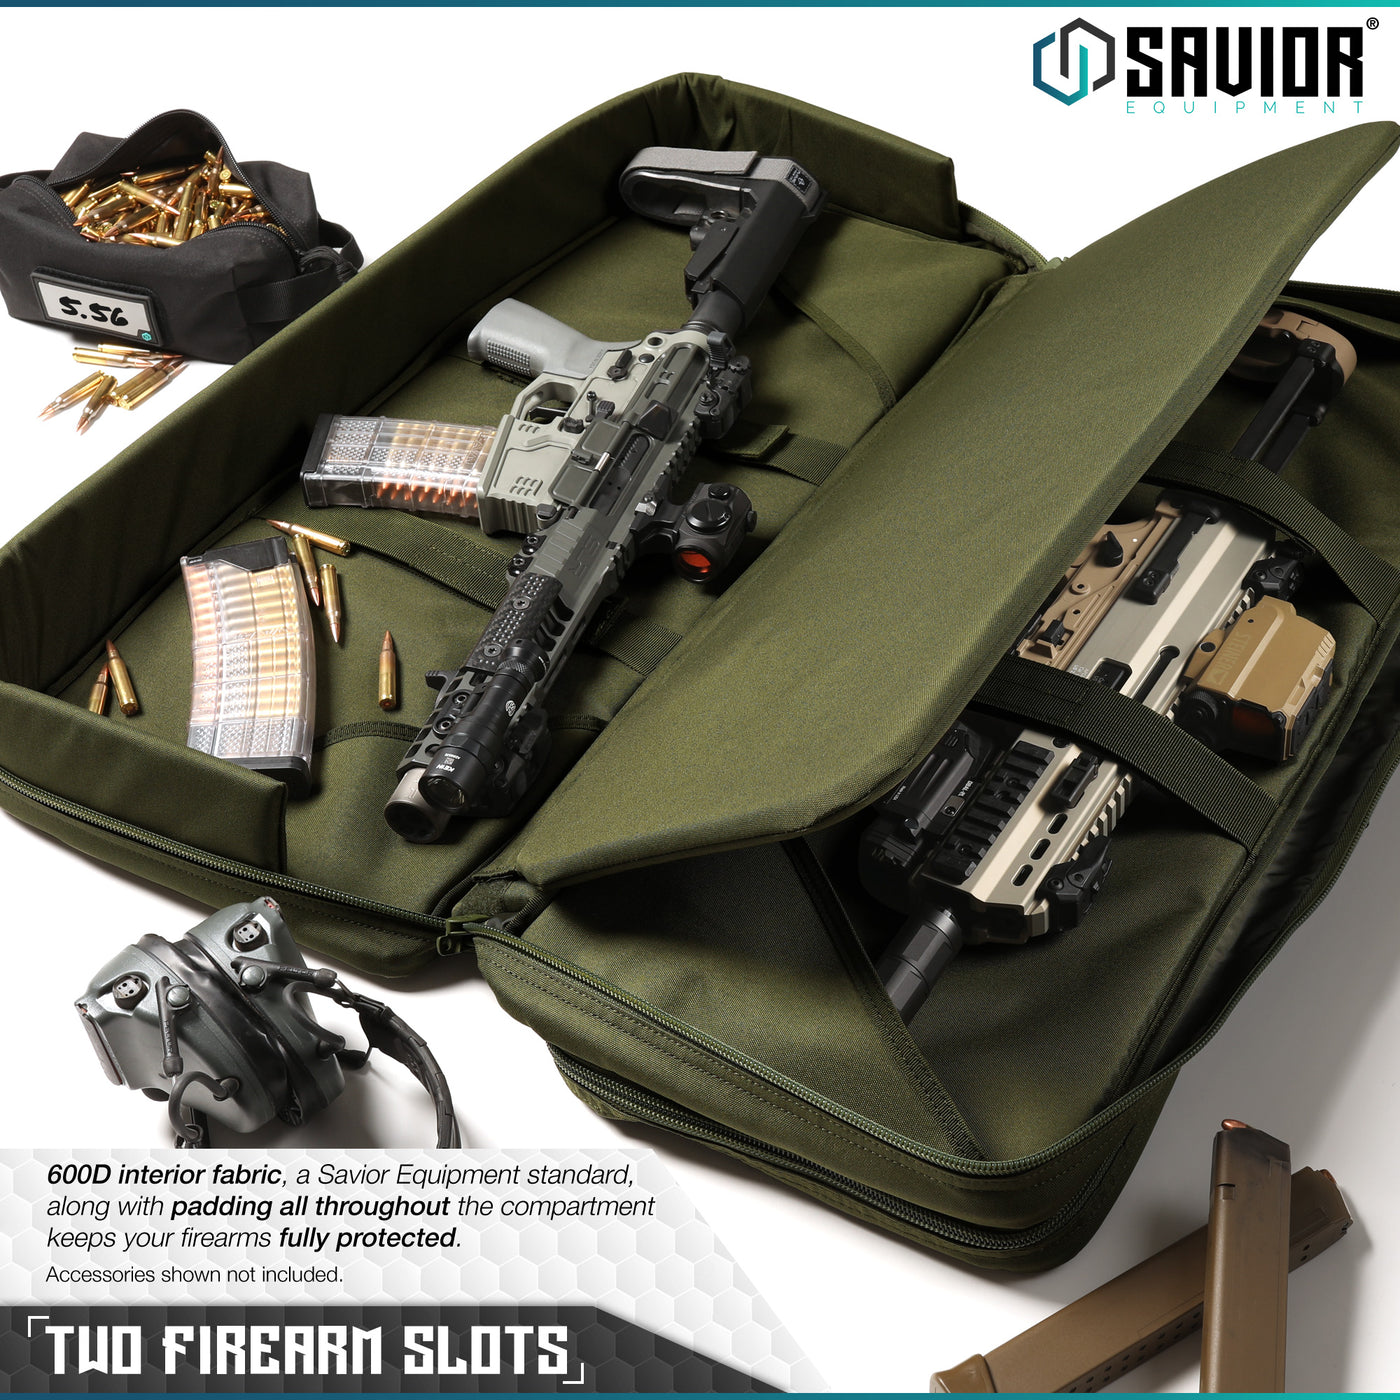 Two Rifle Slots - 600D interior fabric, a Savior Equipment standard, along with padding all throughout the compartment keeps your firearms fully protected. Accessories shown not included.